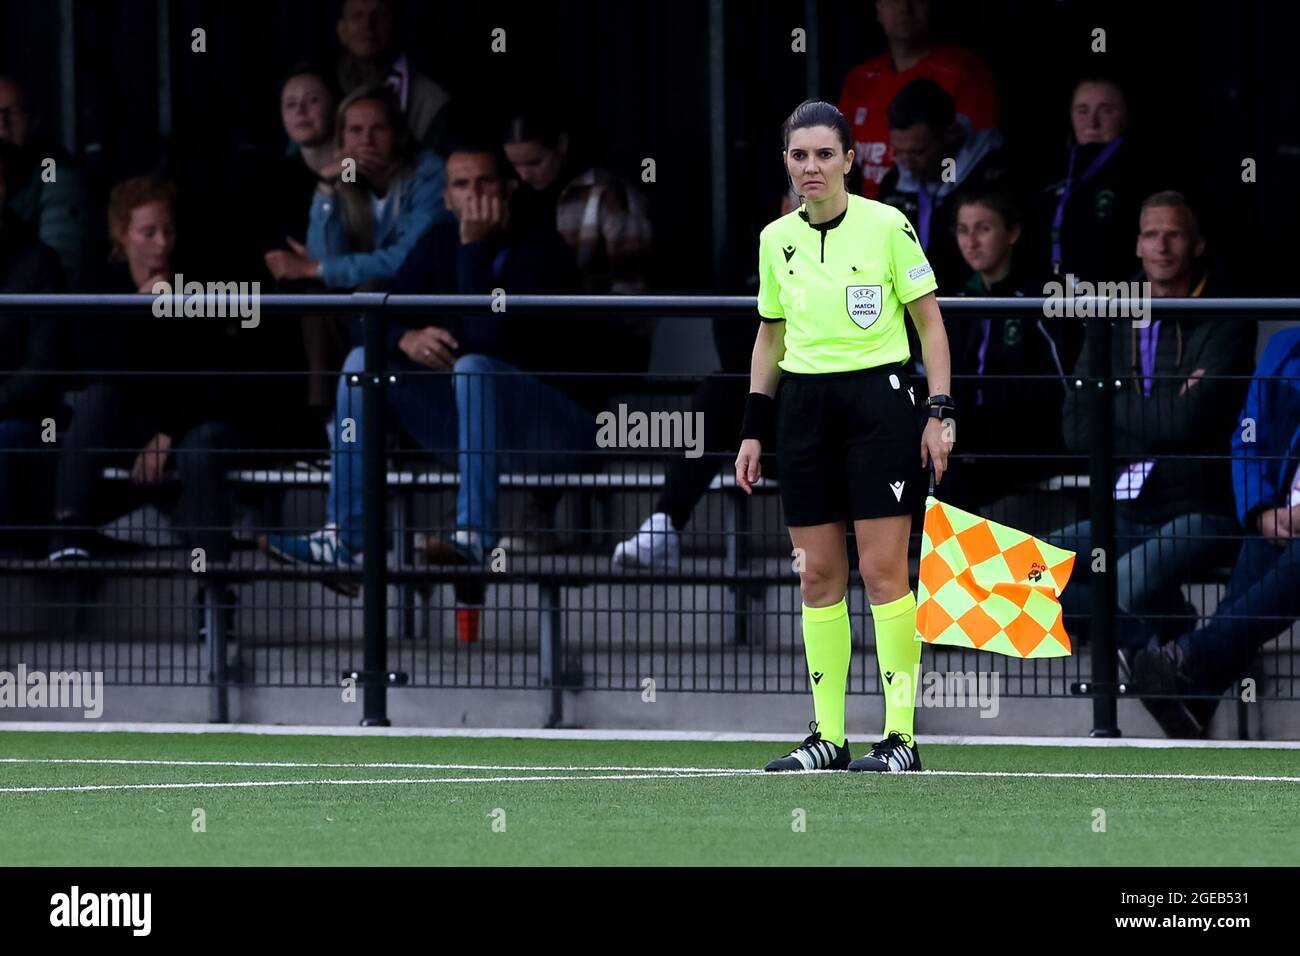 ENSCHEDE, NETHERLANDS - AUGUST 18: Assistant referee Veronica Martinelli  during the UEFA Women's Champions League First Qualifying Round match  between FC Twente and FC Nike at Sportclub Enschede on August 18, 2021